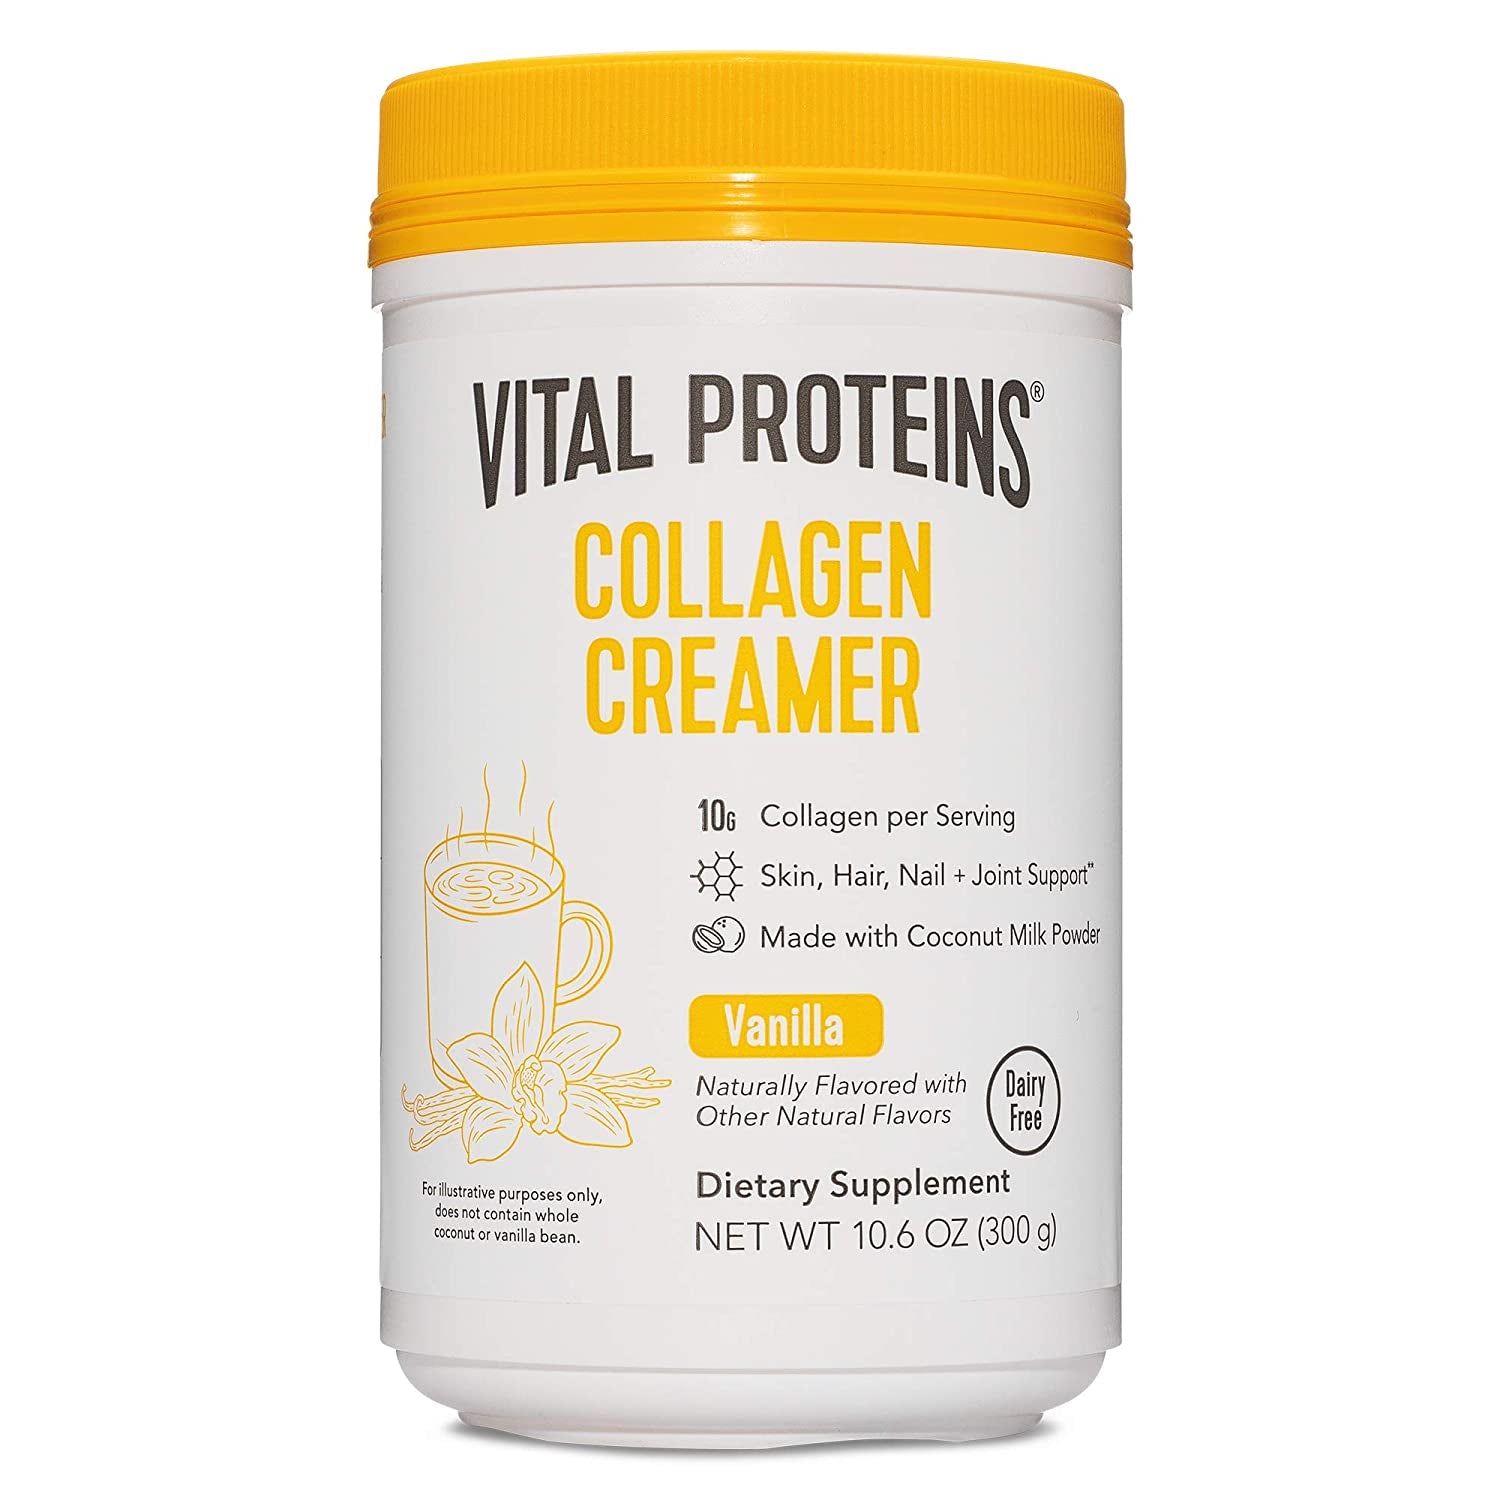 "Vital Proteins Vanilla Collagen Coffee Creamer for Healthy Hair, Skin, and Nails - Energy-Boosting MCTs Included!"